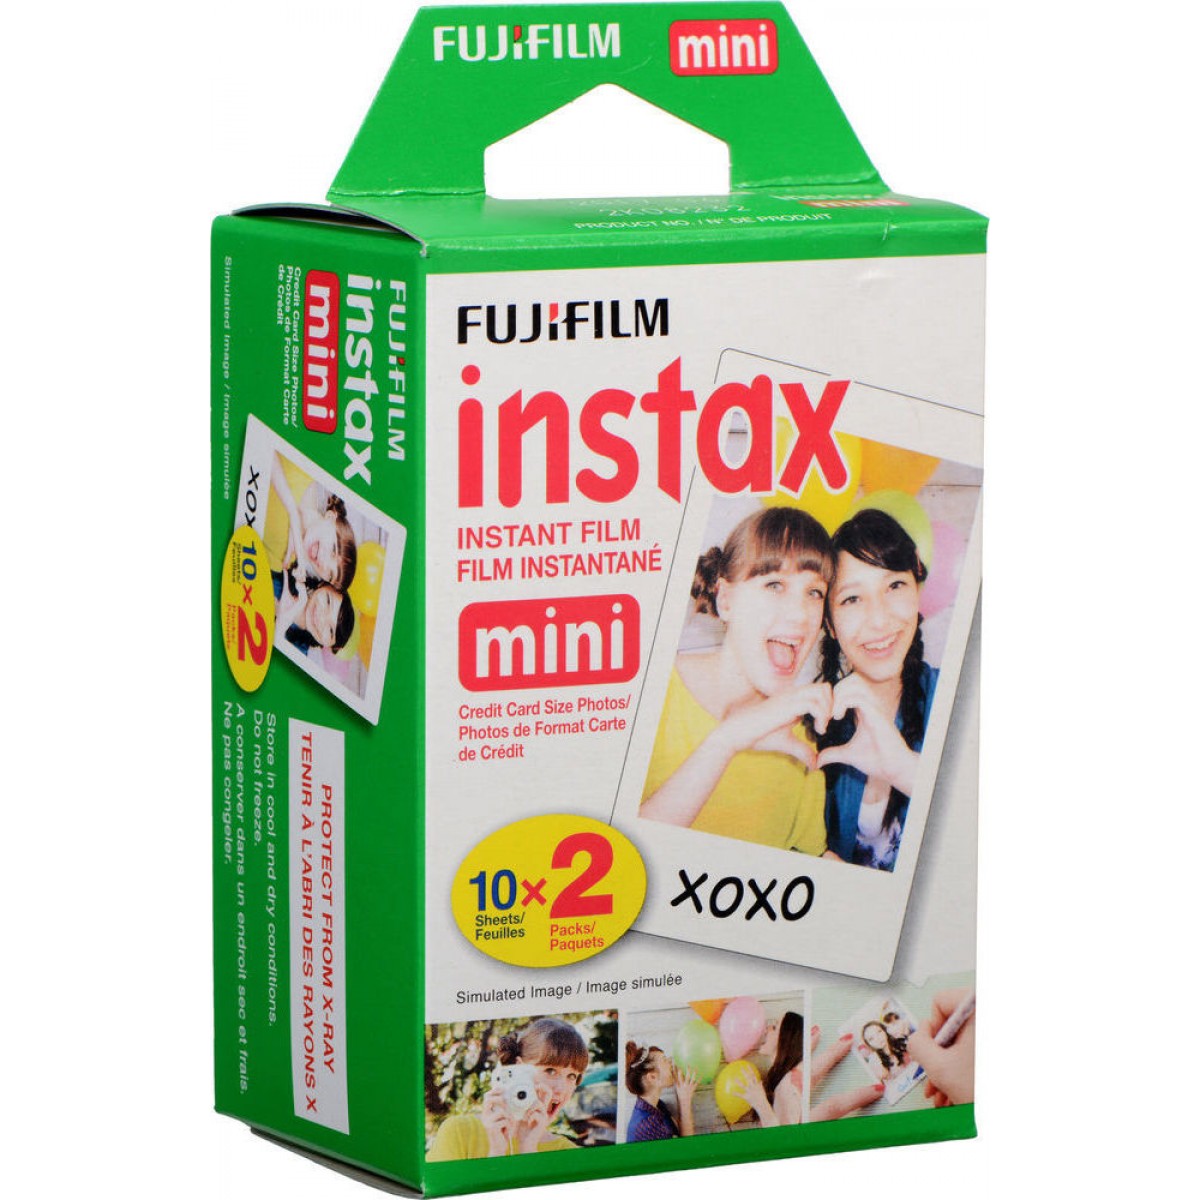 FILM FUJIFILM INSTAX COLOR 10x2 PACK CREDIT CARD SIZE